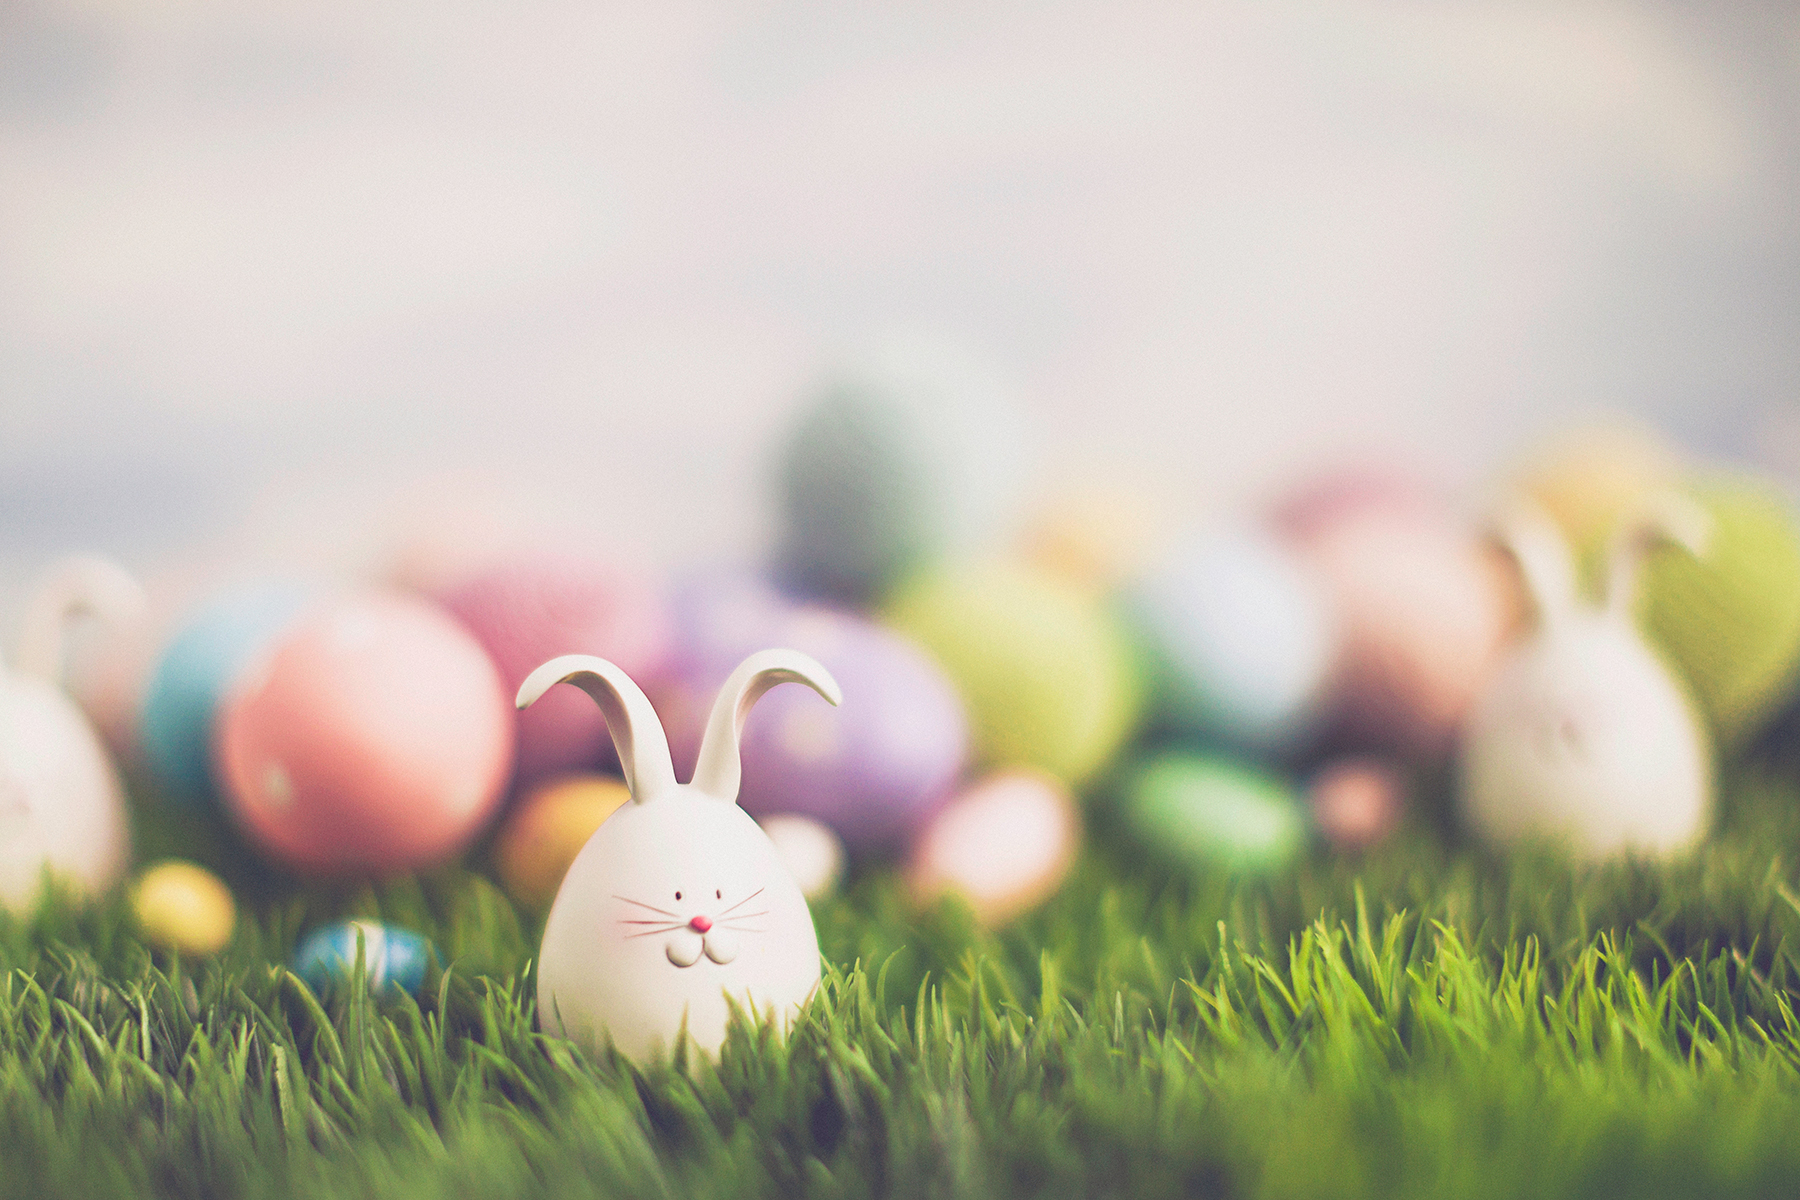 Image of a bunny decorated Easter egg on artificial grass in the foreground with other colourful Easter eggs out of focus in the background